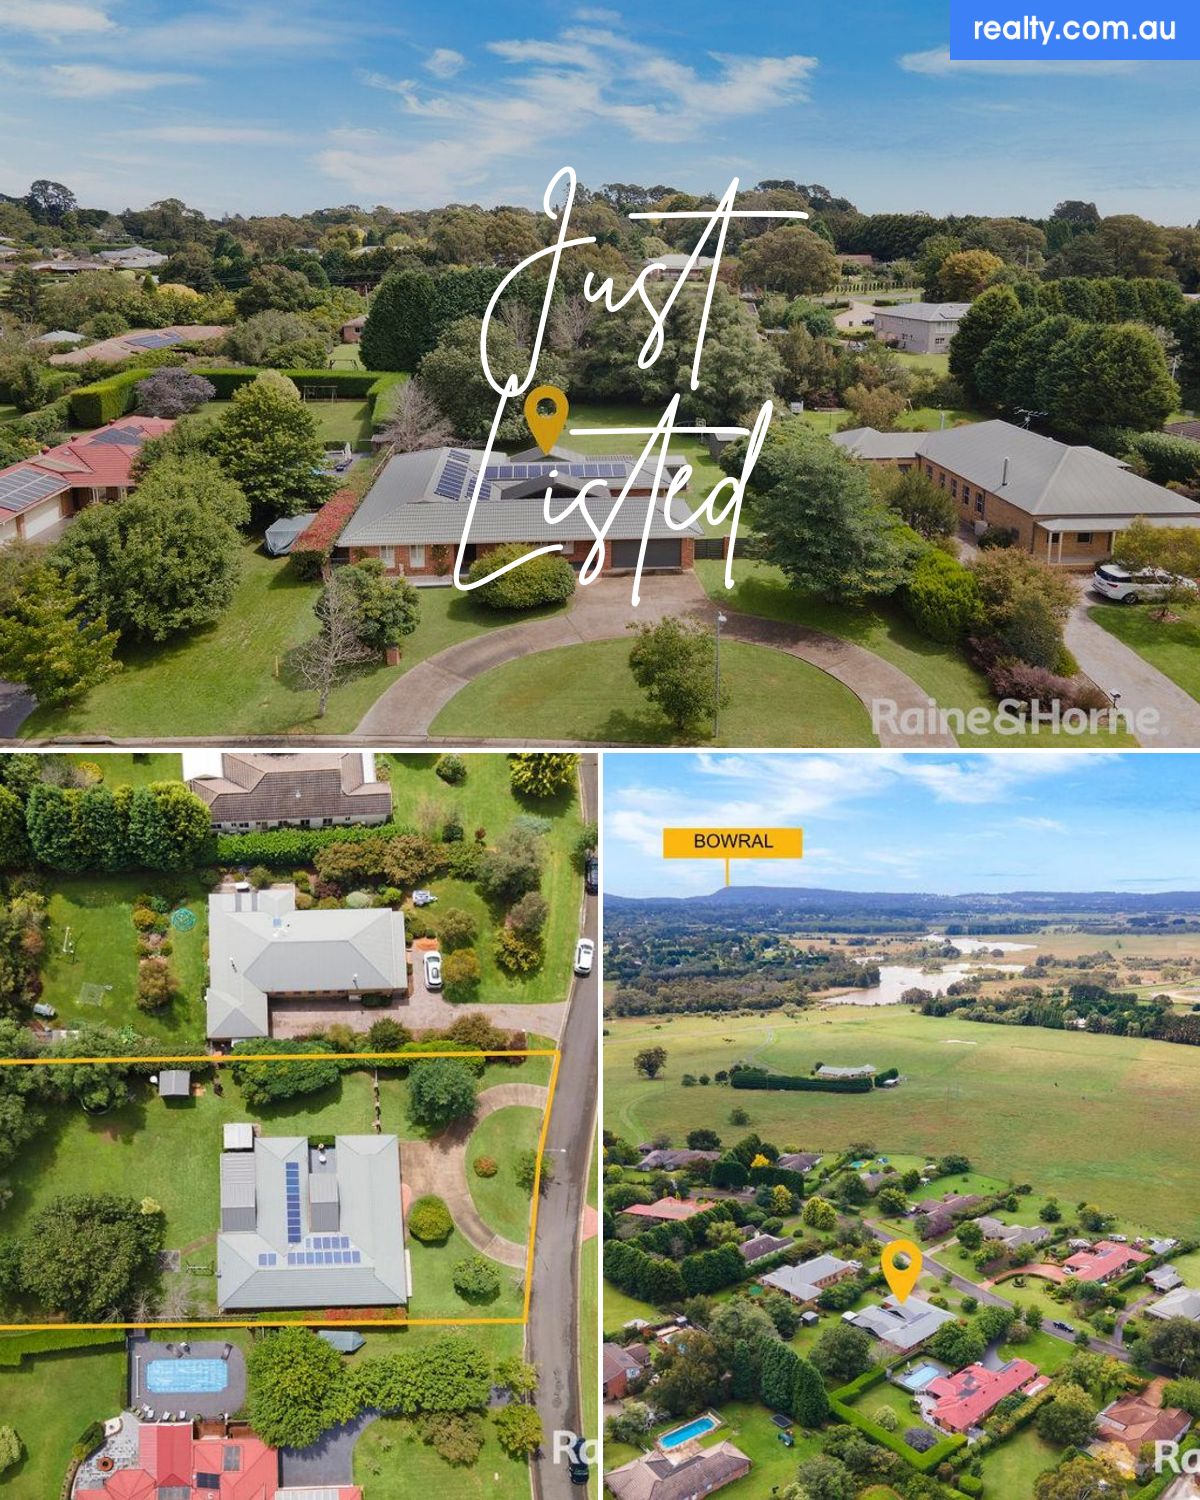 10 Victor Crescent, Moss Vale, NSW 2577 | Realty.com.au